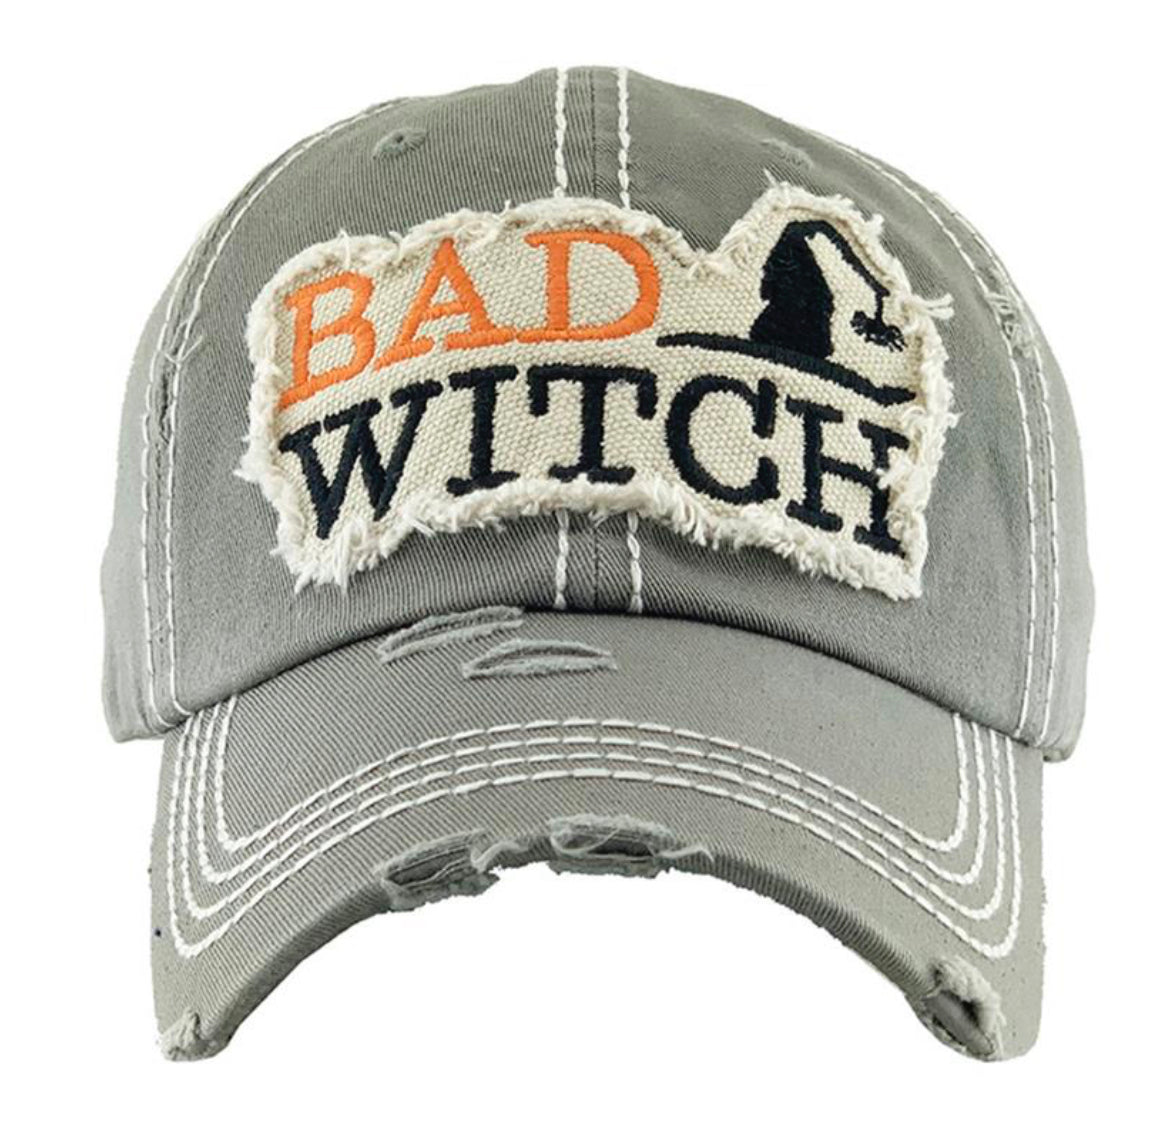 Bad witch hat